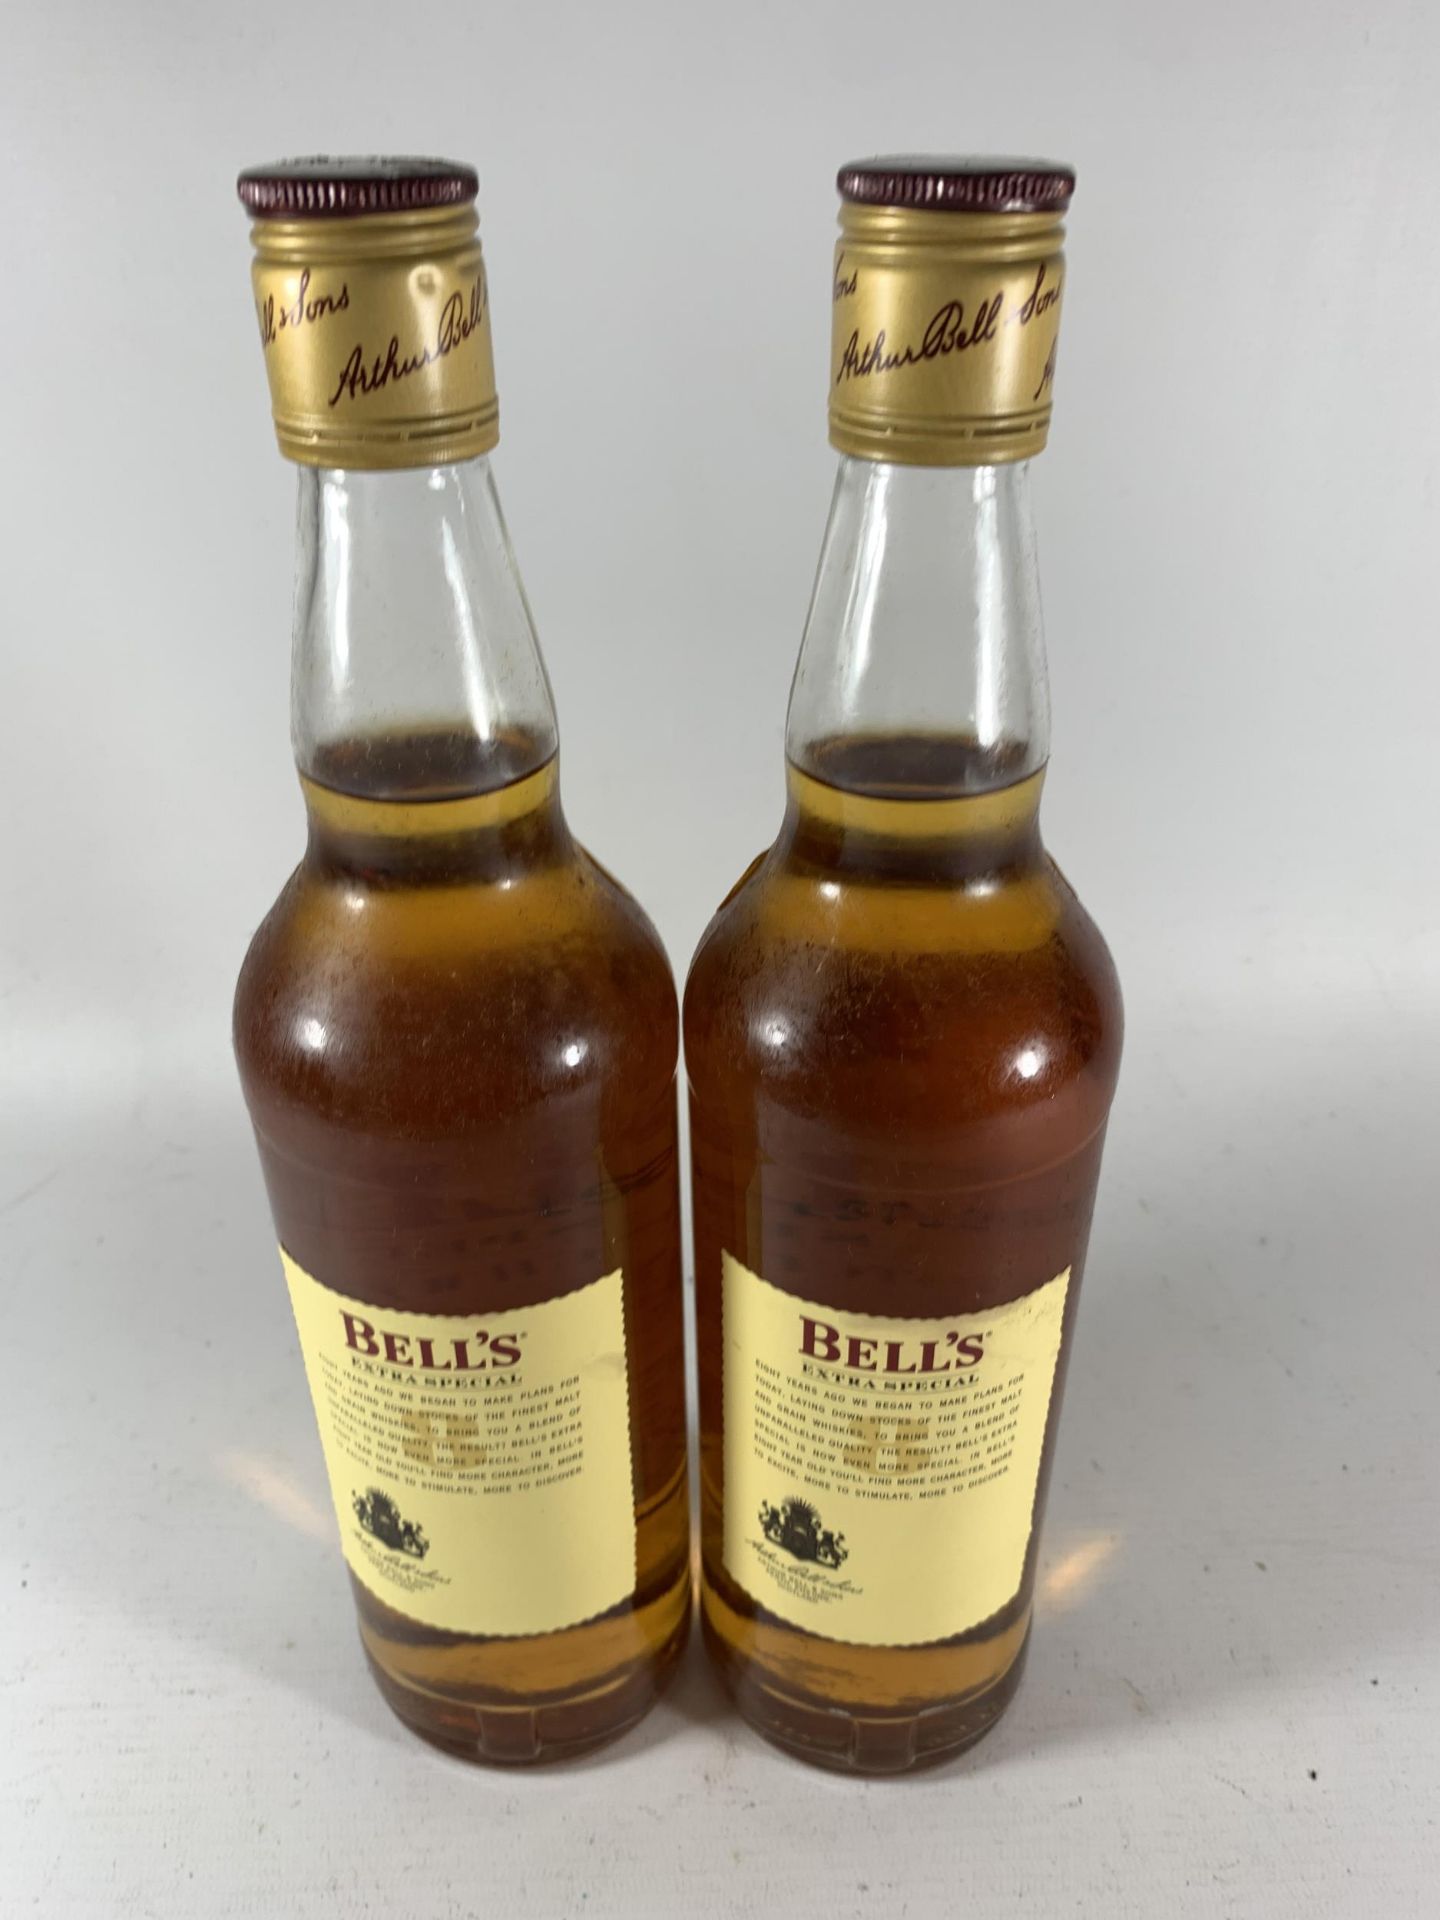 2 X 70CL BOTTLE - BELL'S EXTRA SPECIAL AGED 8 YEARS OLD SCOTCH WHISKY - Image 3 of 3